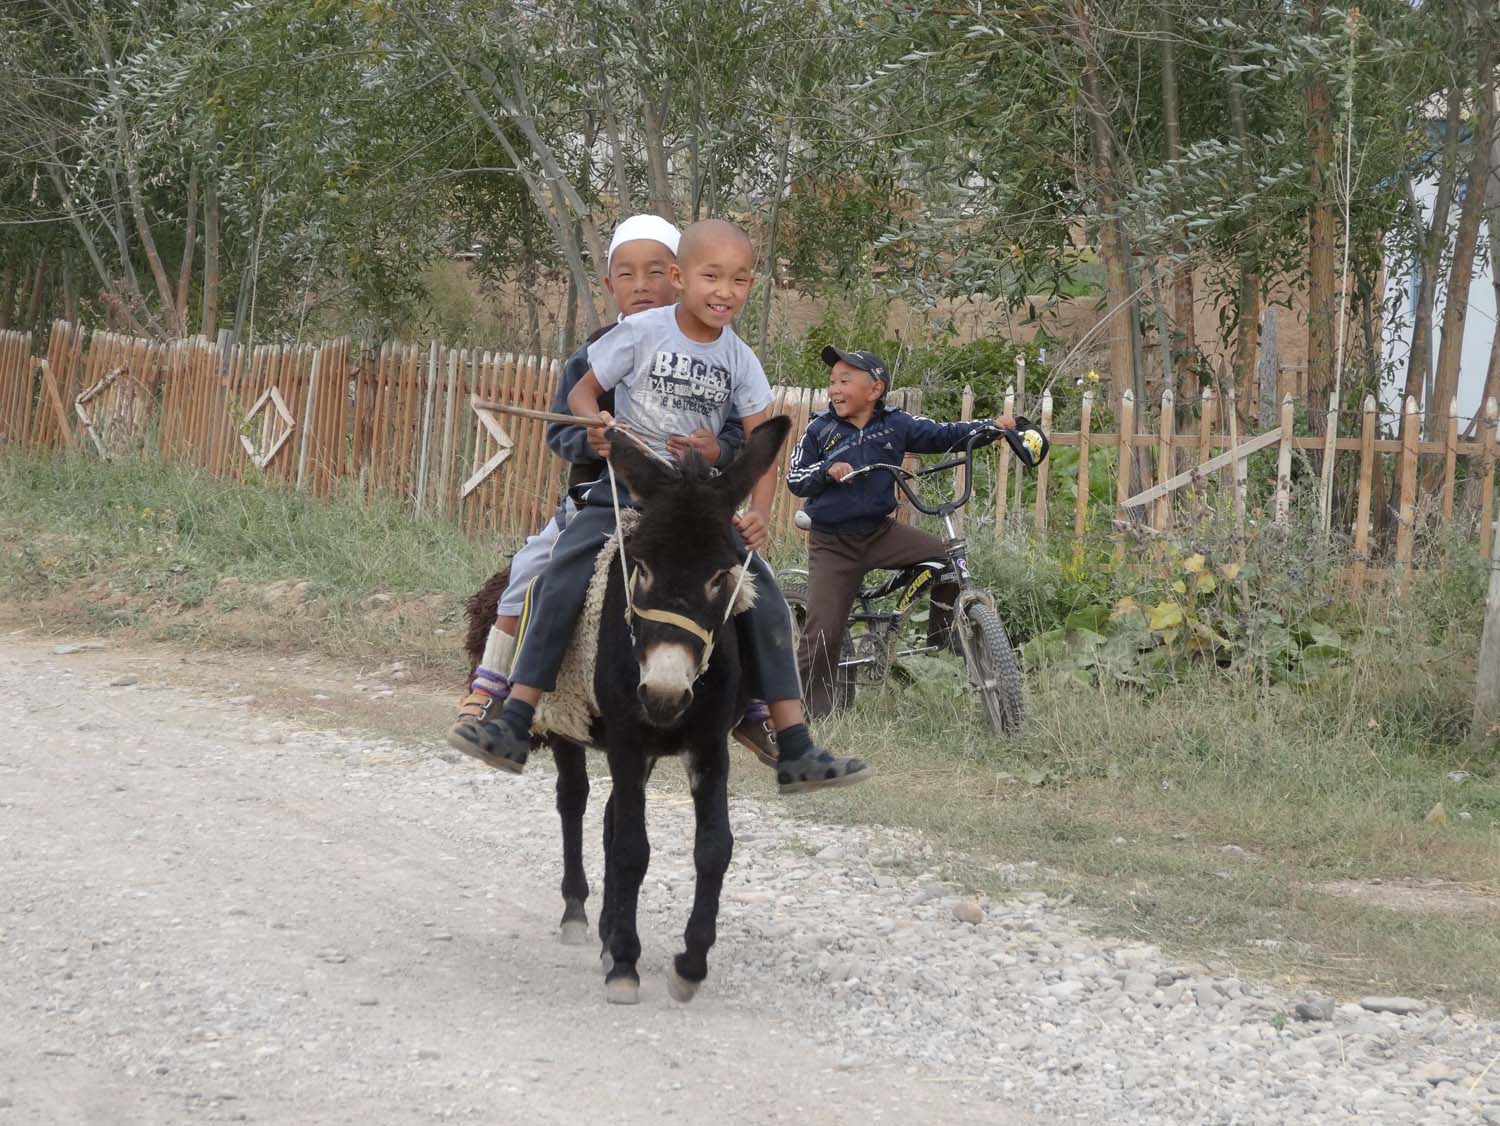 2 boys riding a donkey, usually adults ride them which always looks a bit silly